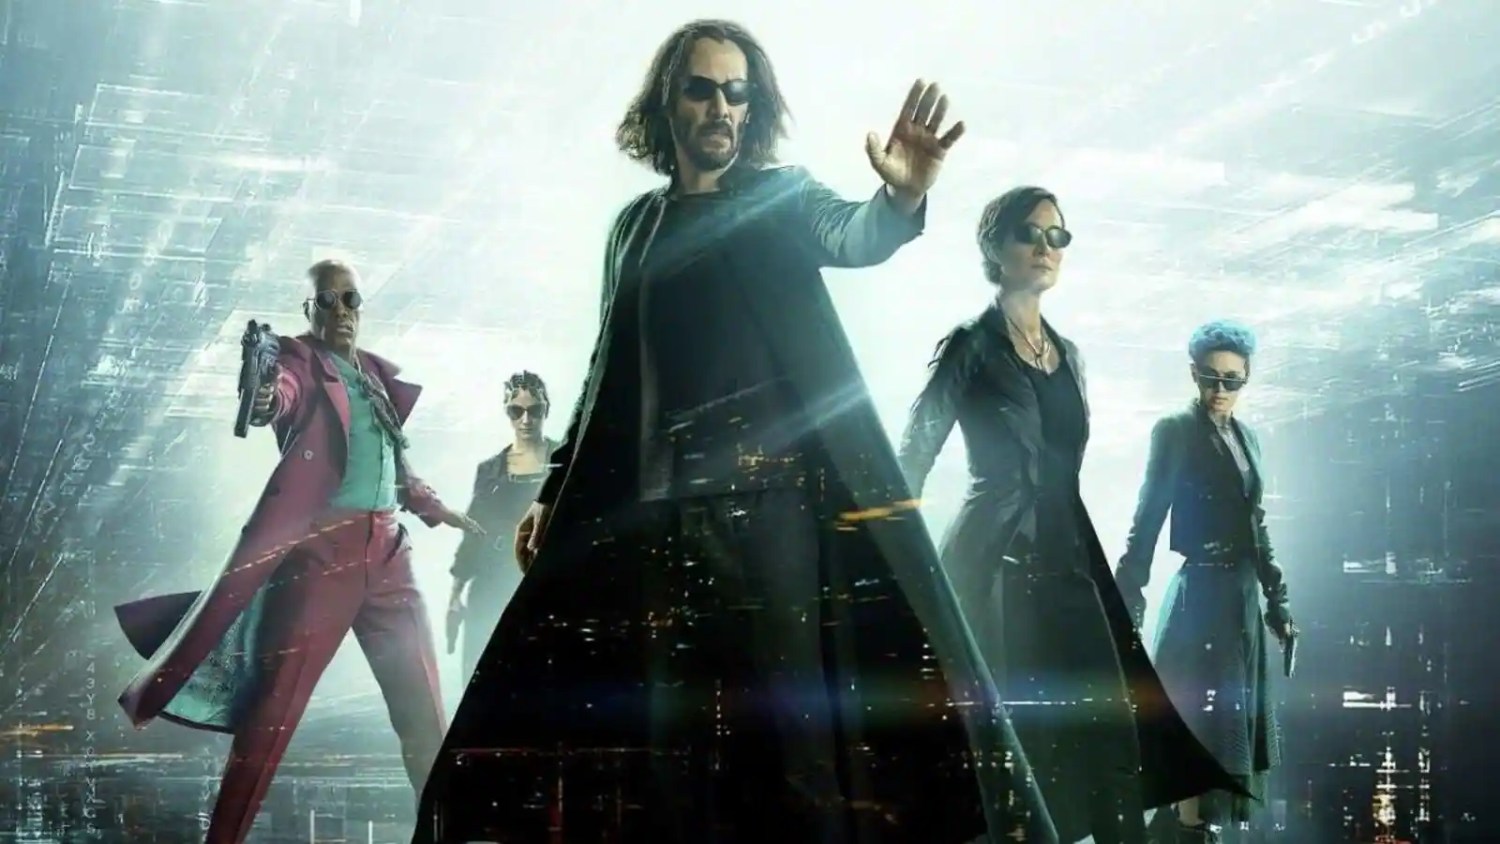 Why Resurrections' Action Scenes Are Worse Than The Original Matrix Trilogy